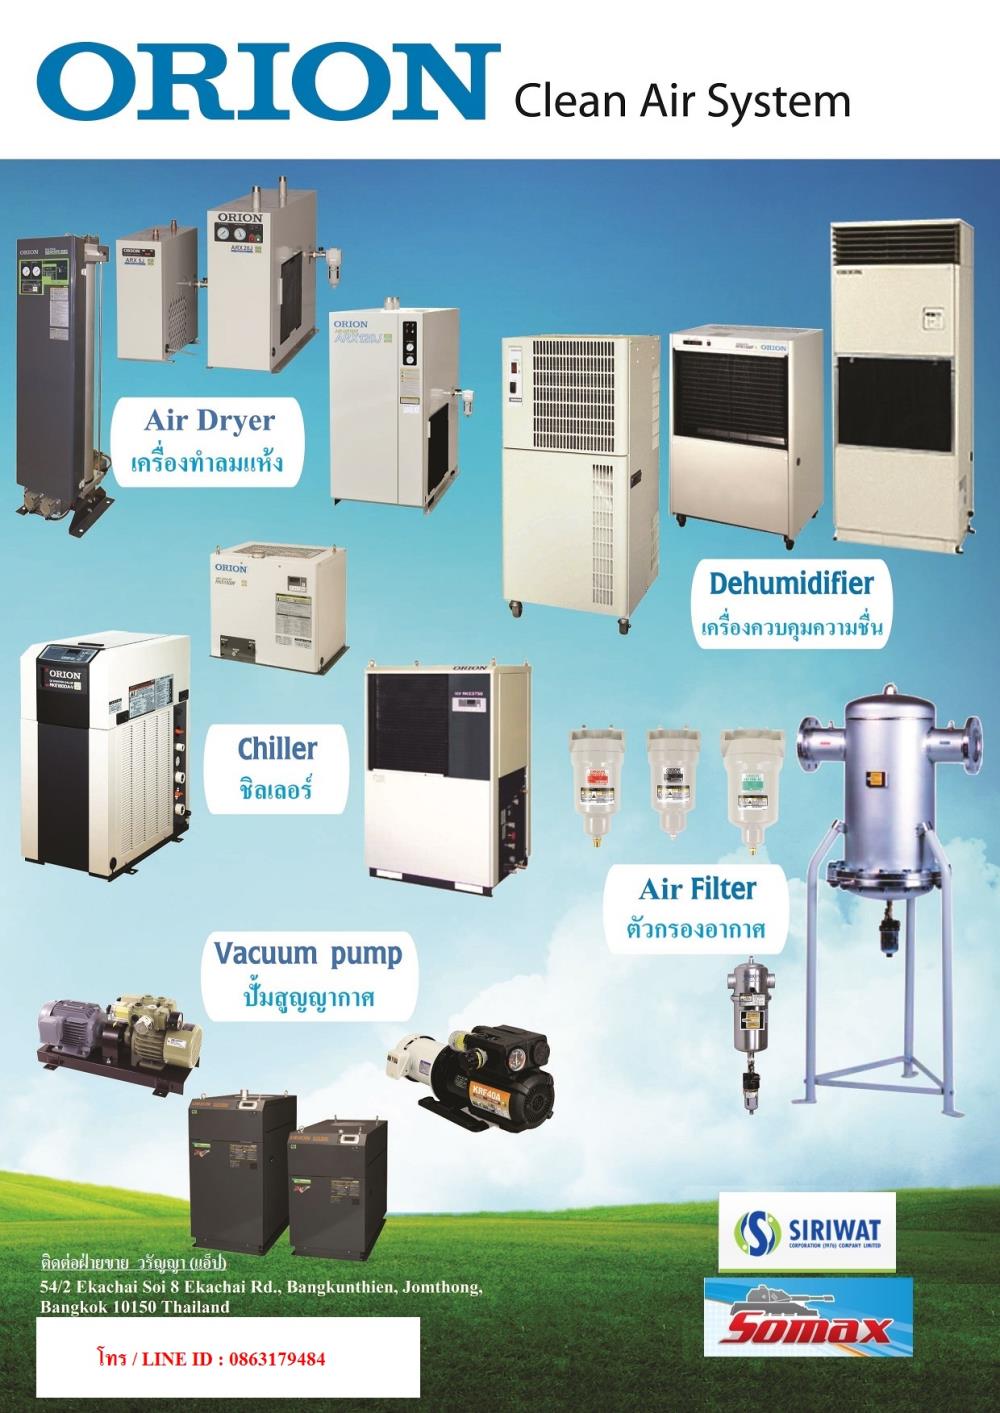 ORION ,ORION Airdryer Vacuum Chiller Dehumidifier,ORION,Machinery and Process Equipment/Compressors/Air Compressor